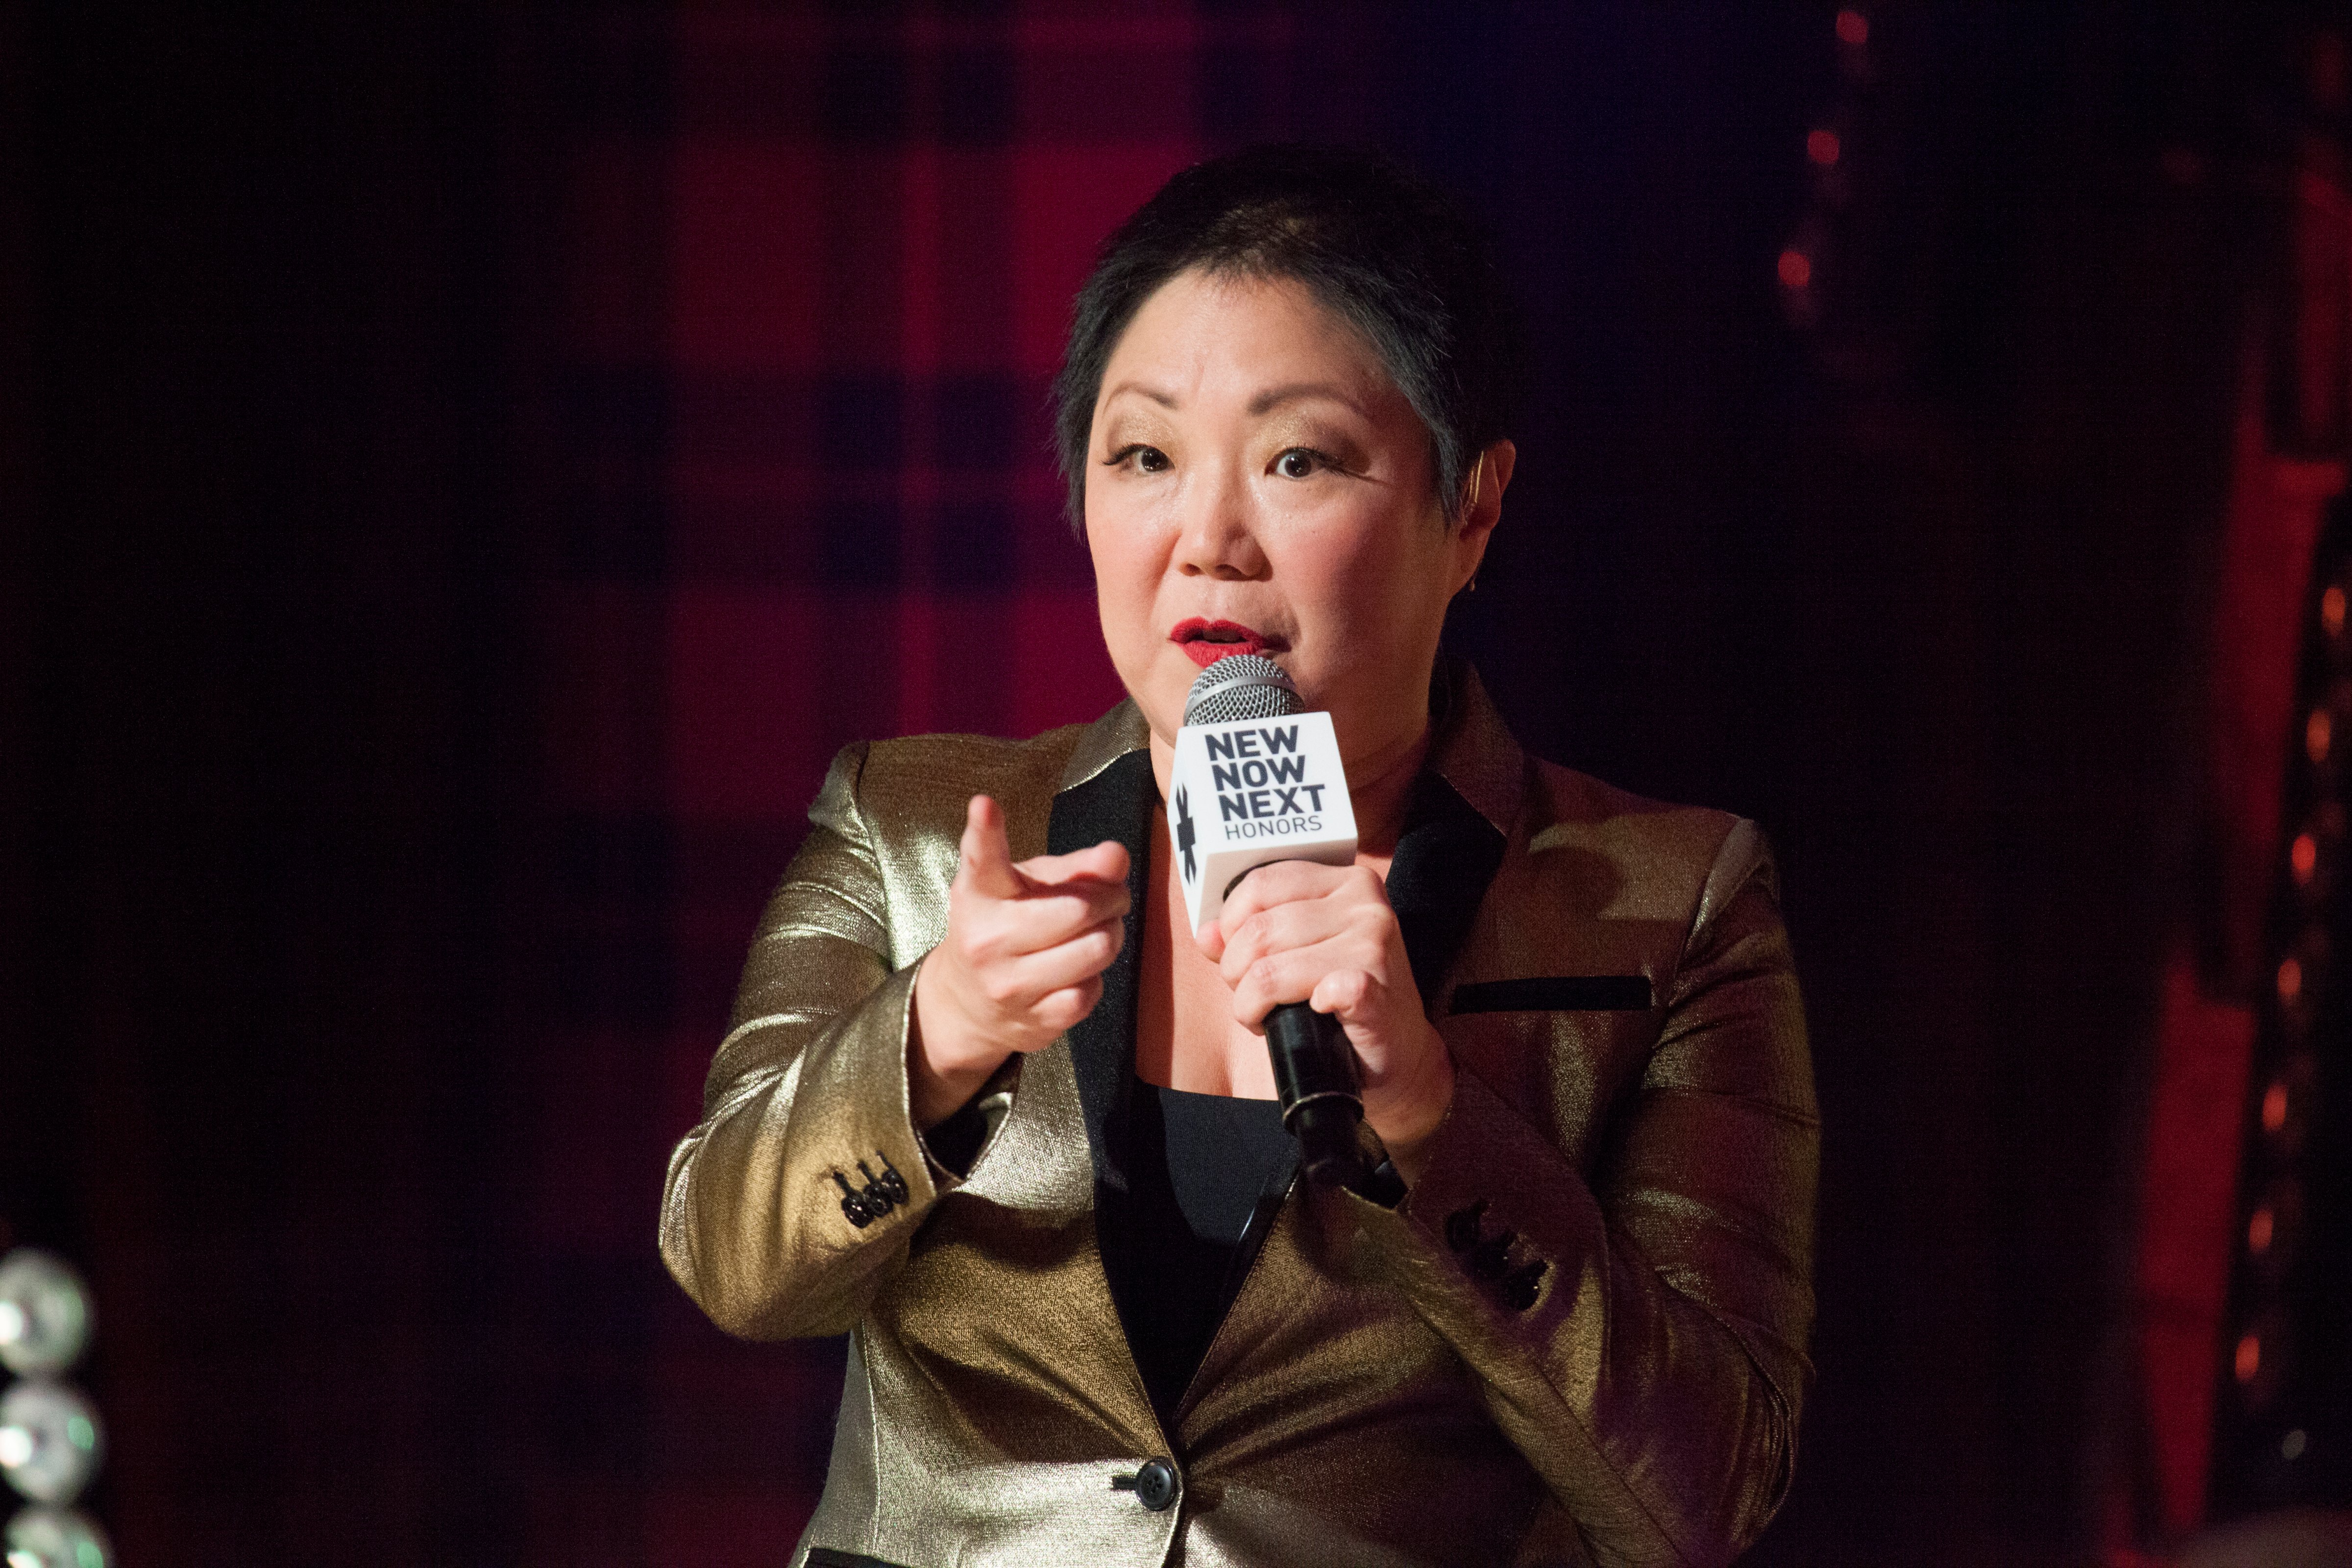 Margaret Cho hosts the Logo New Now Next Honors From Aspen Gay Ski Week on January 23, 2016 in Aspen, Colorado. (Santiago Felipe&mdash;2016 Getty Images)